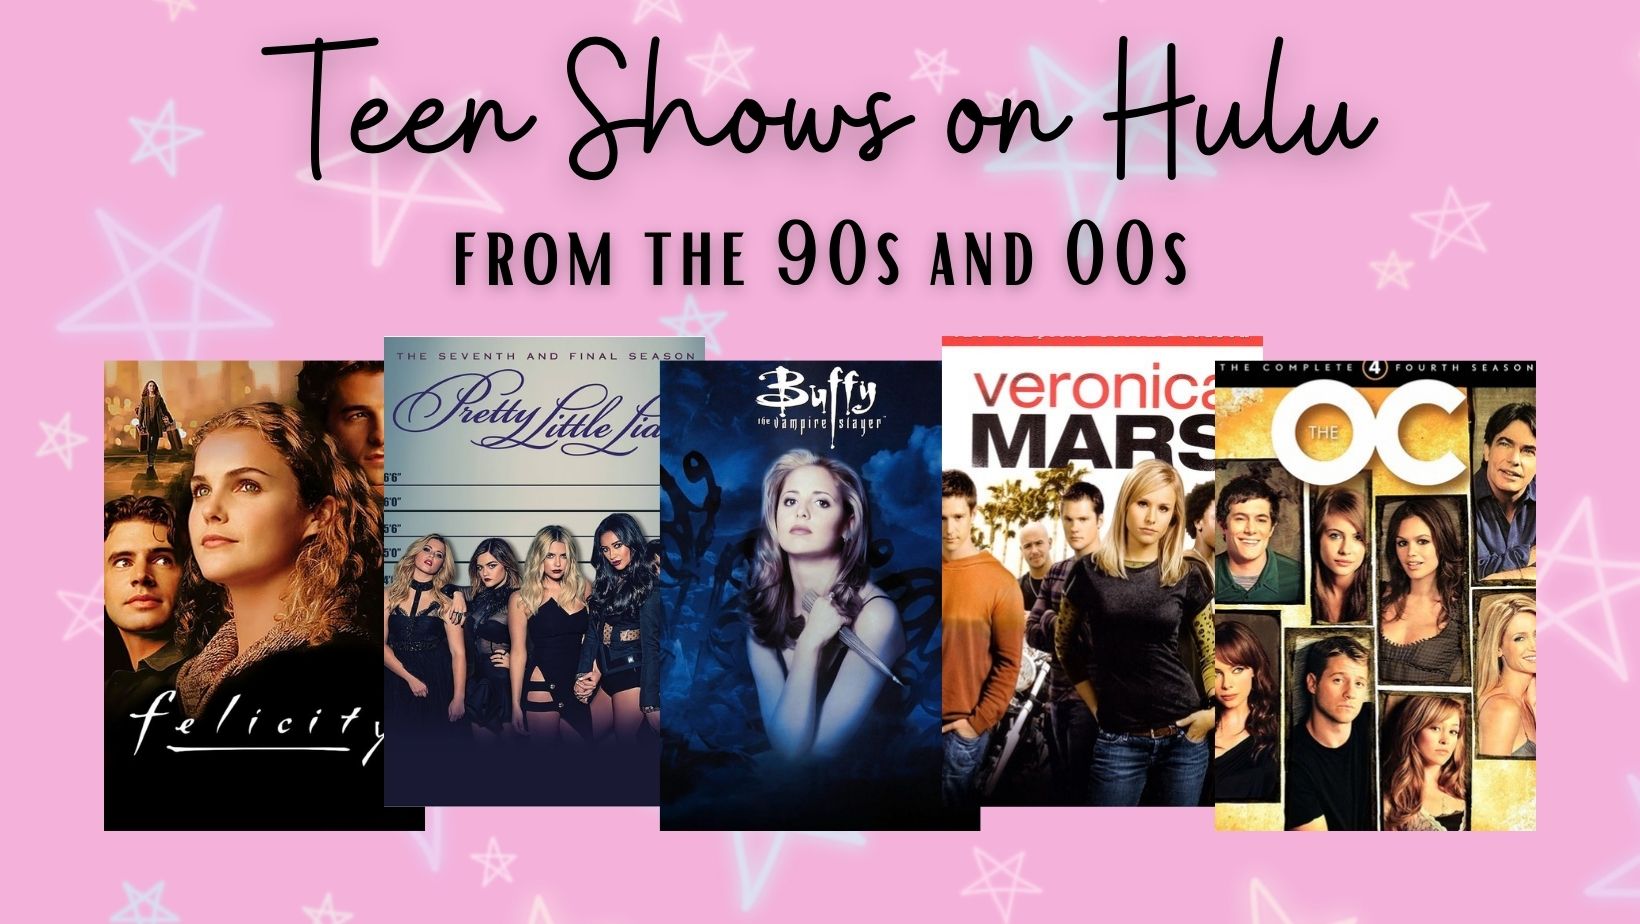 16 Nostalgic Teen Shows on Hulu Streaming Now – 90s 00s Full Series For Teens Tweens and Young Adults